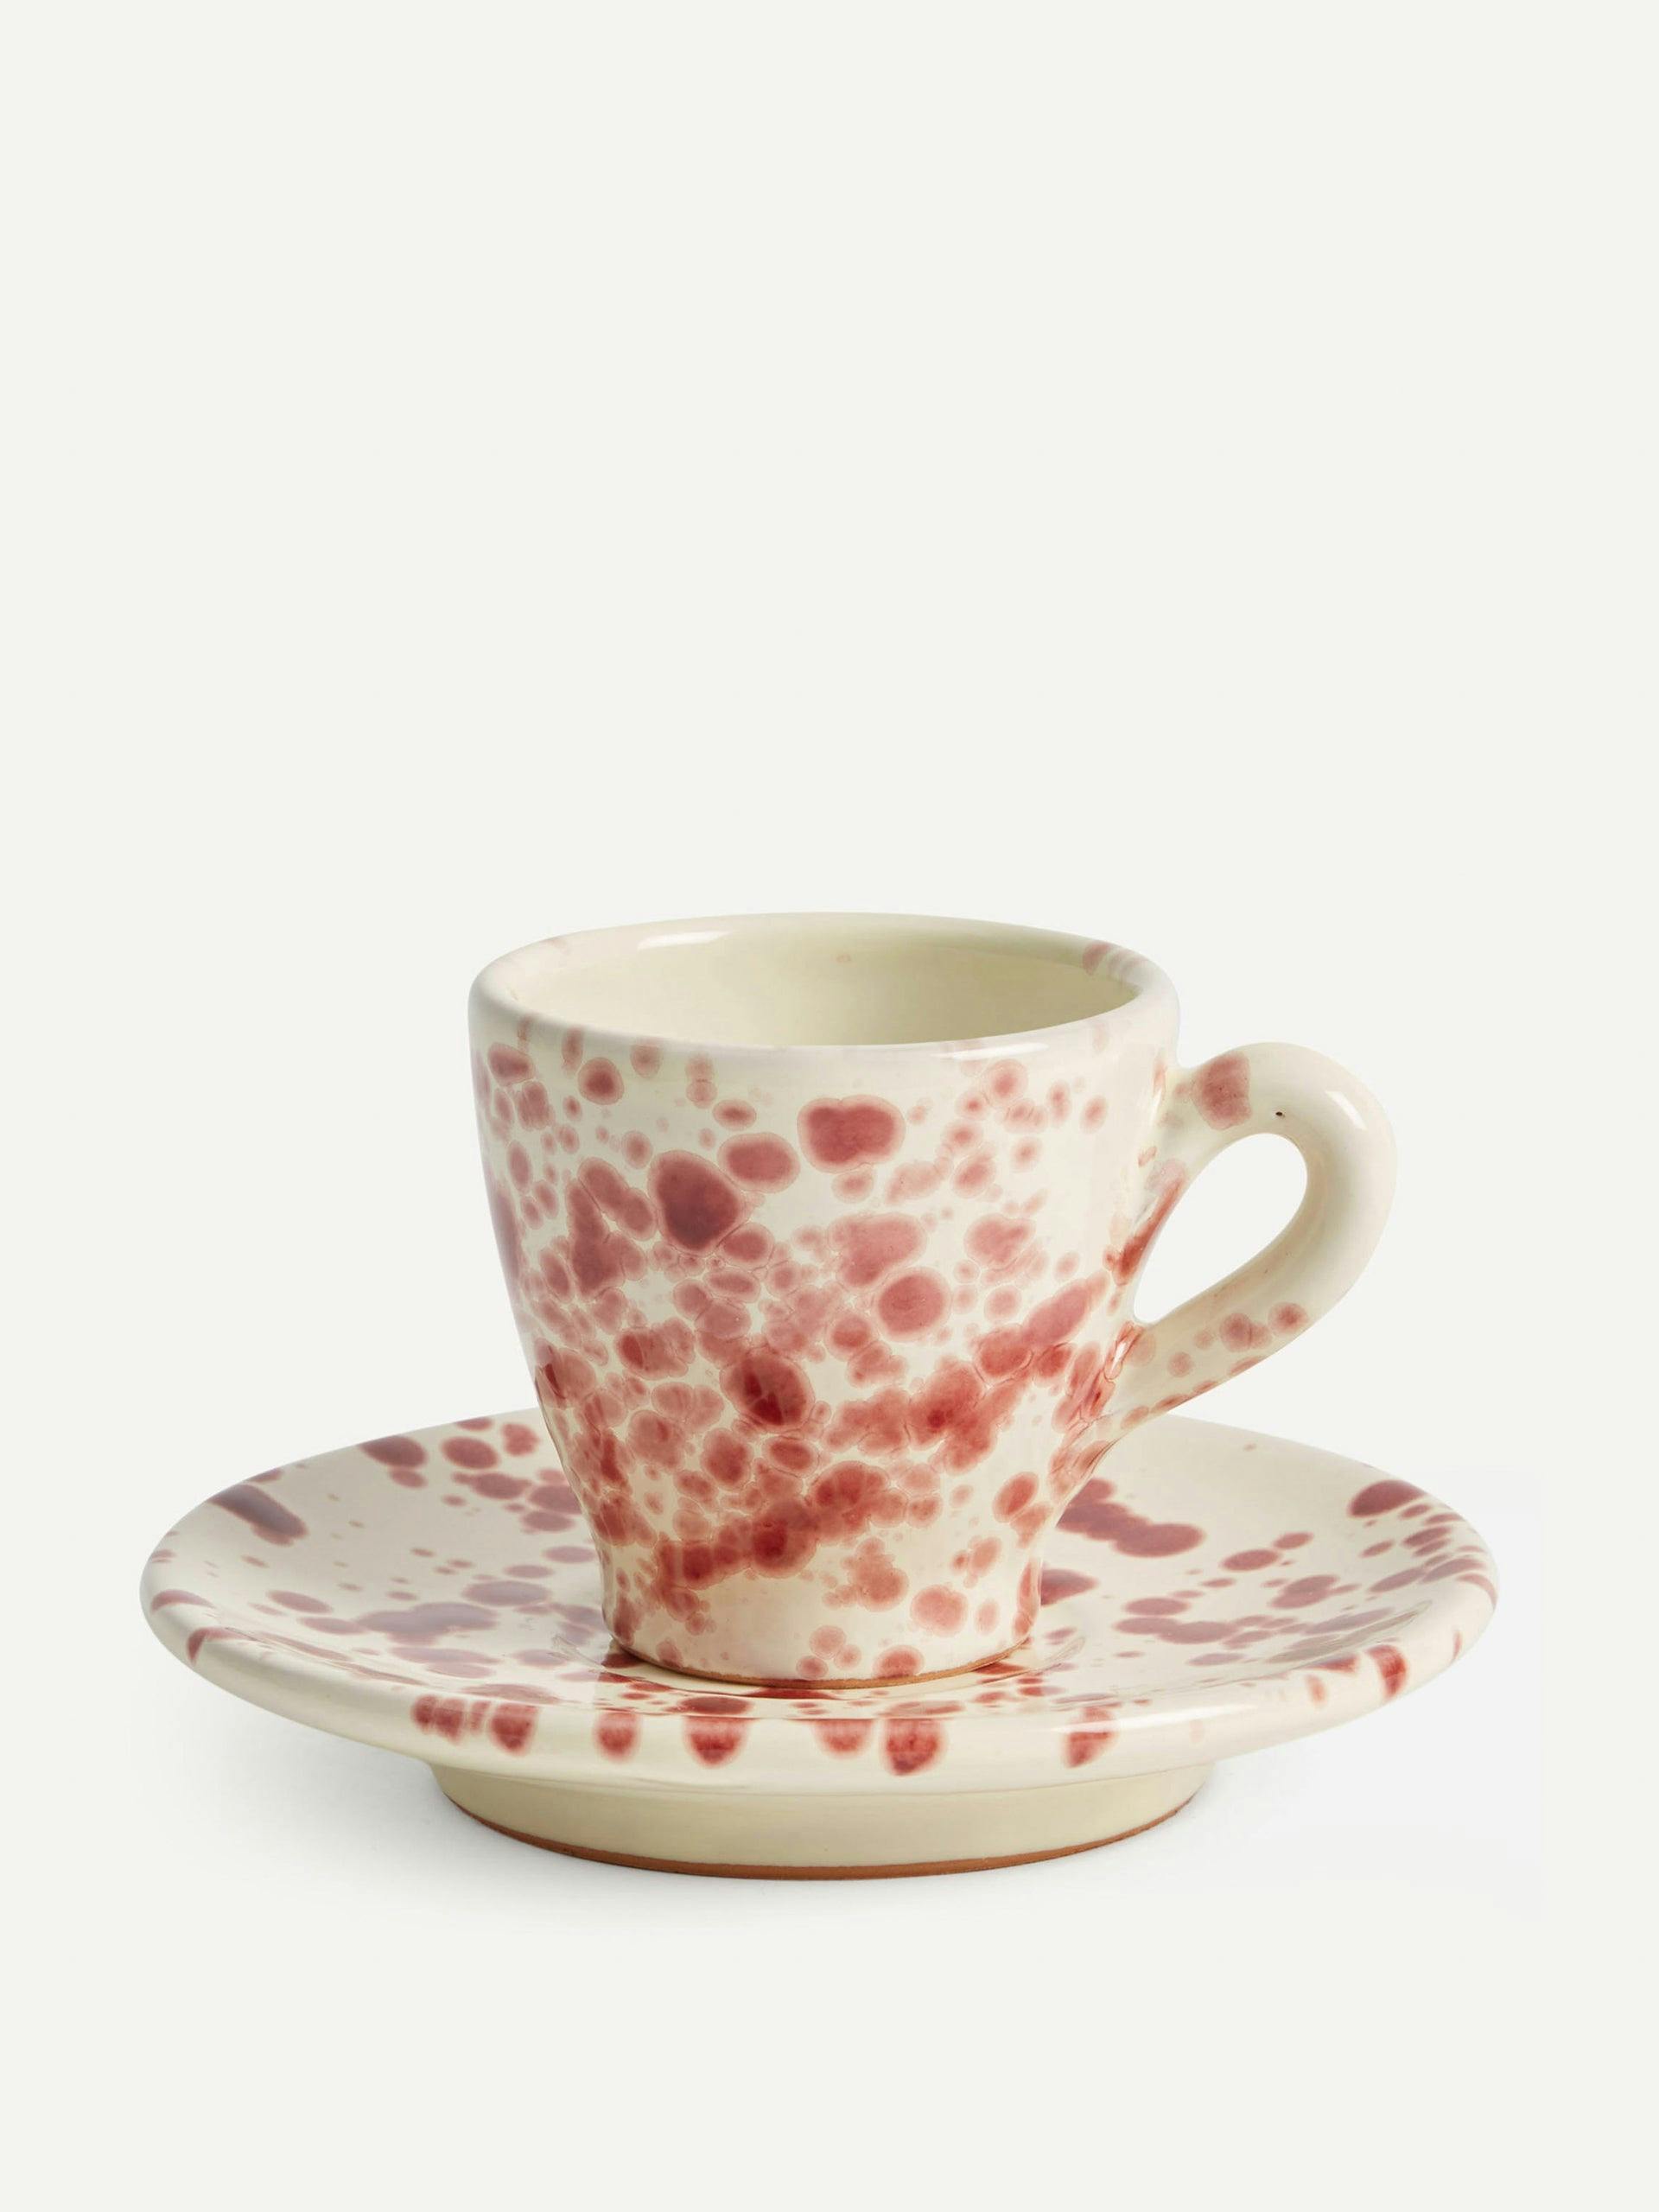 Espresso cup and saucer in cranberry